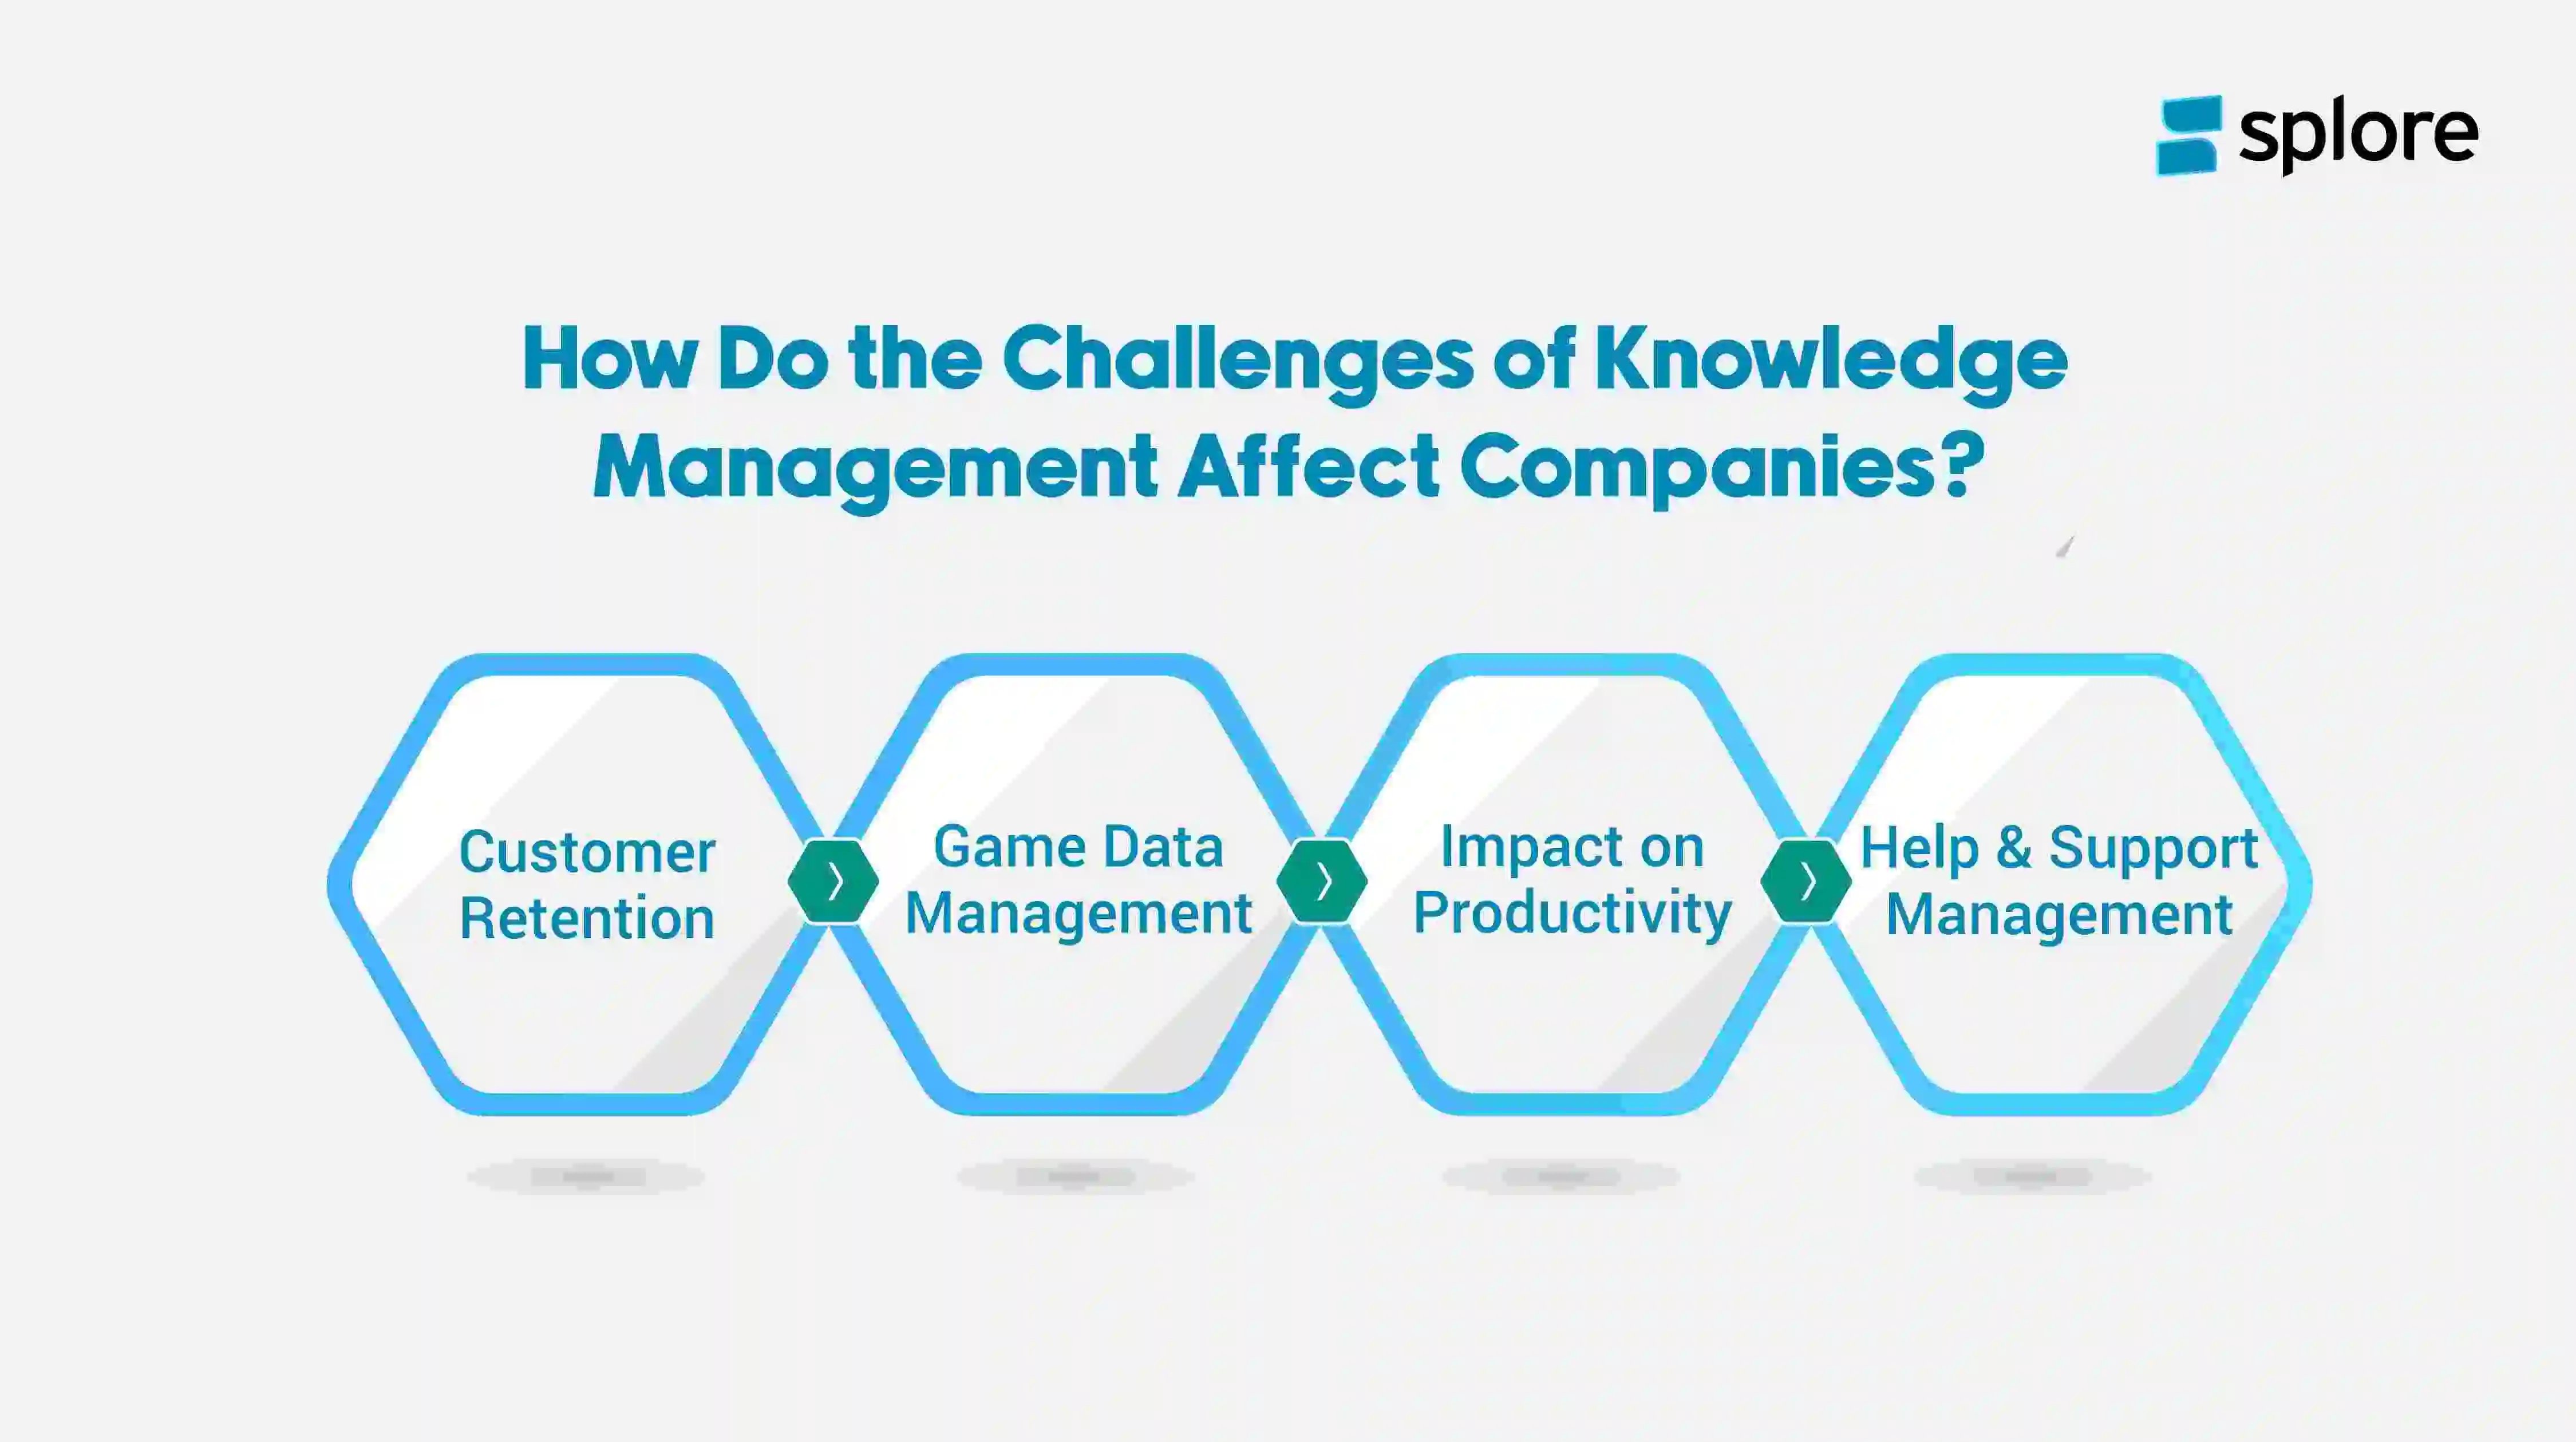 How Do The Challenges of Knowledge Management Affect Companies?